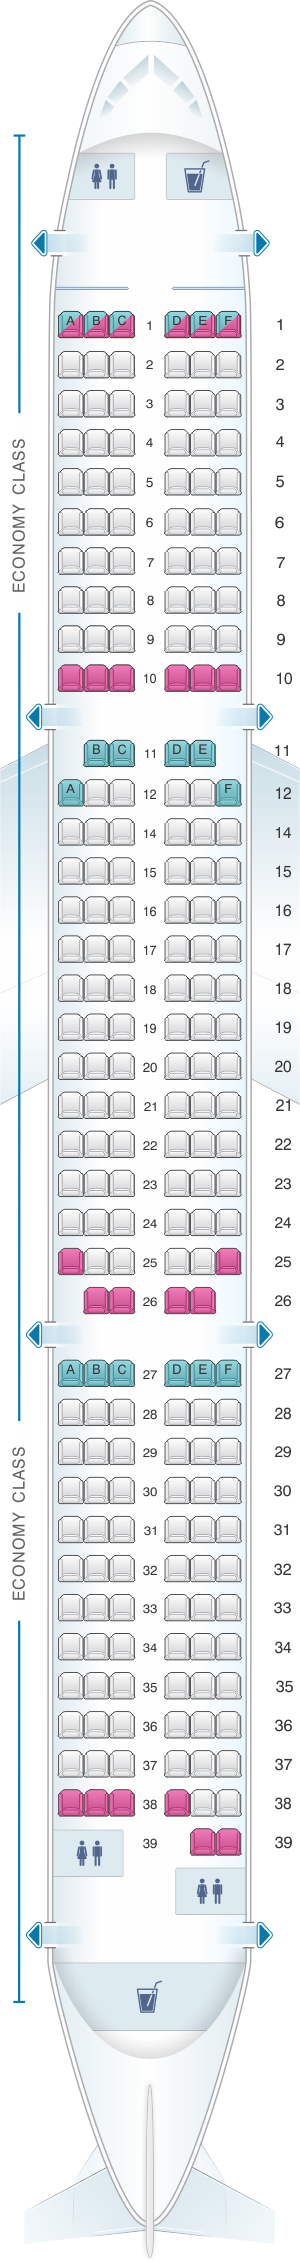 Seat map for Ural Airlines Airbus A321